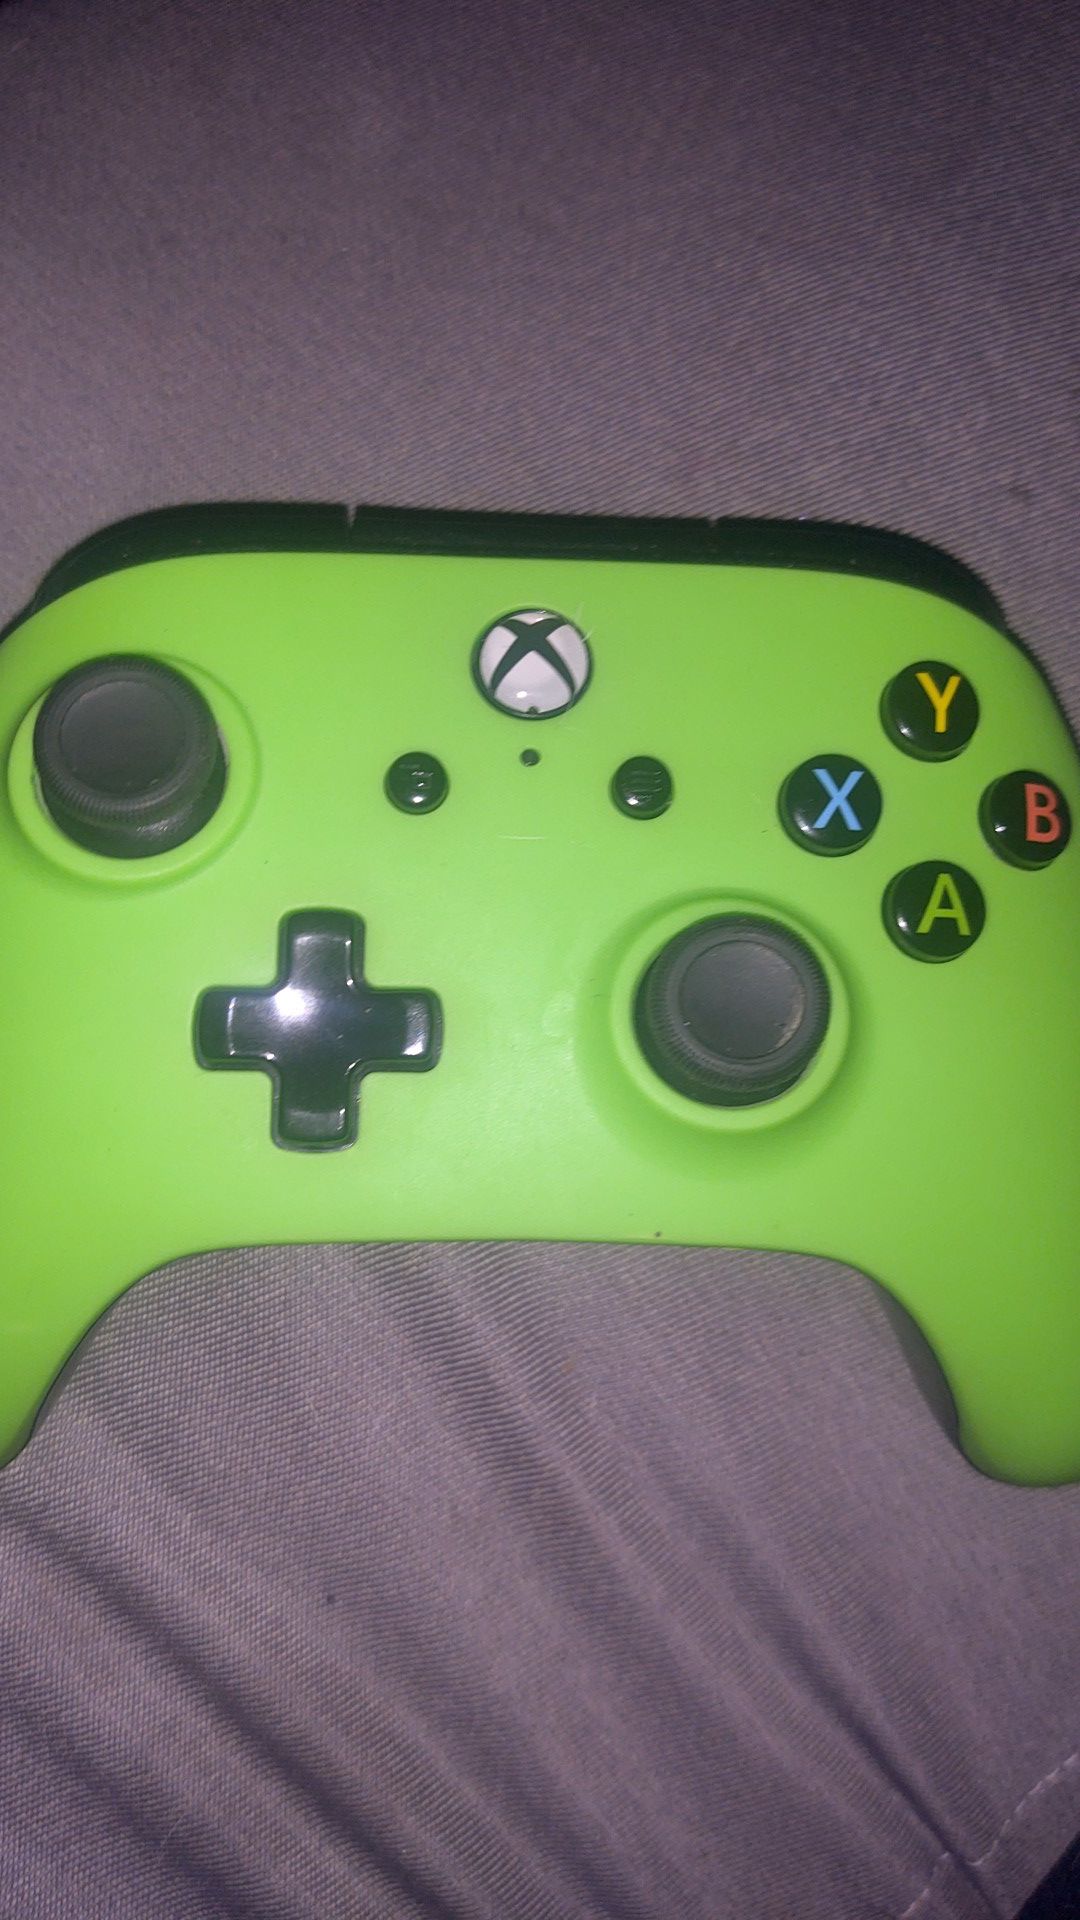 Cheap Xbox controller it's wired